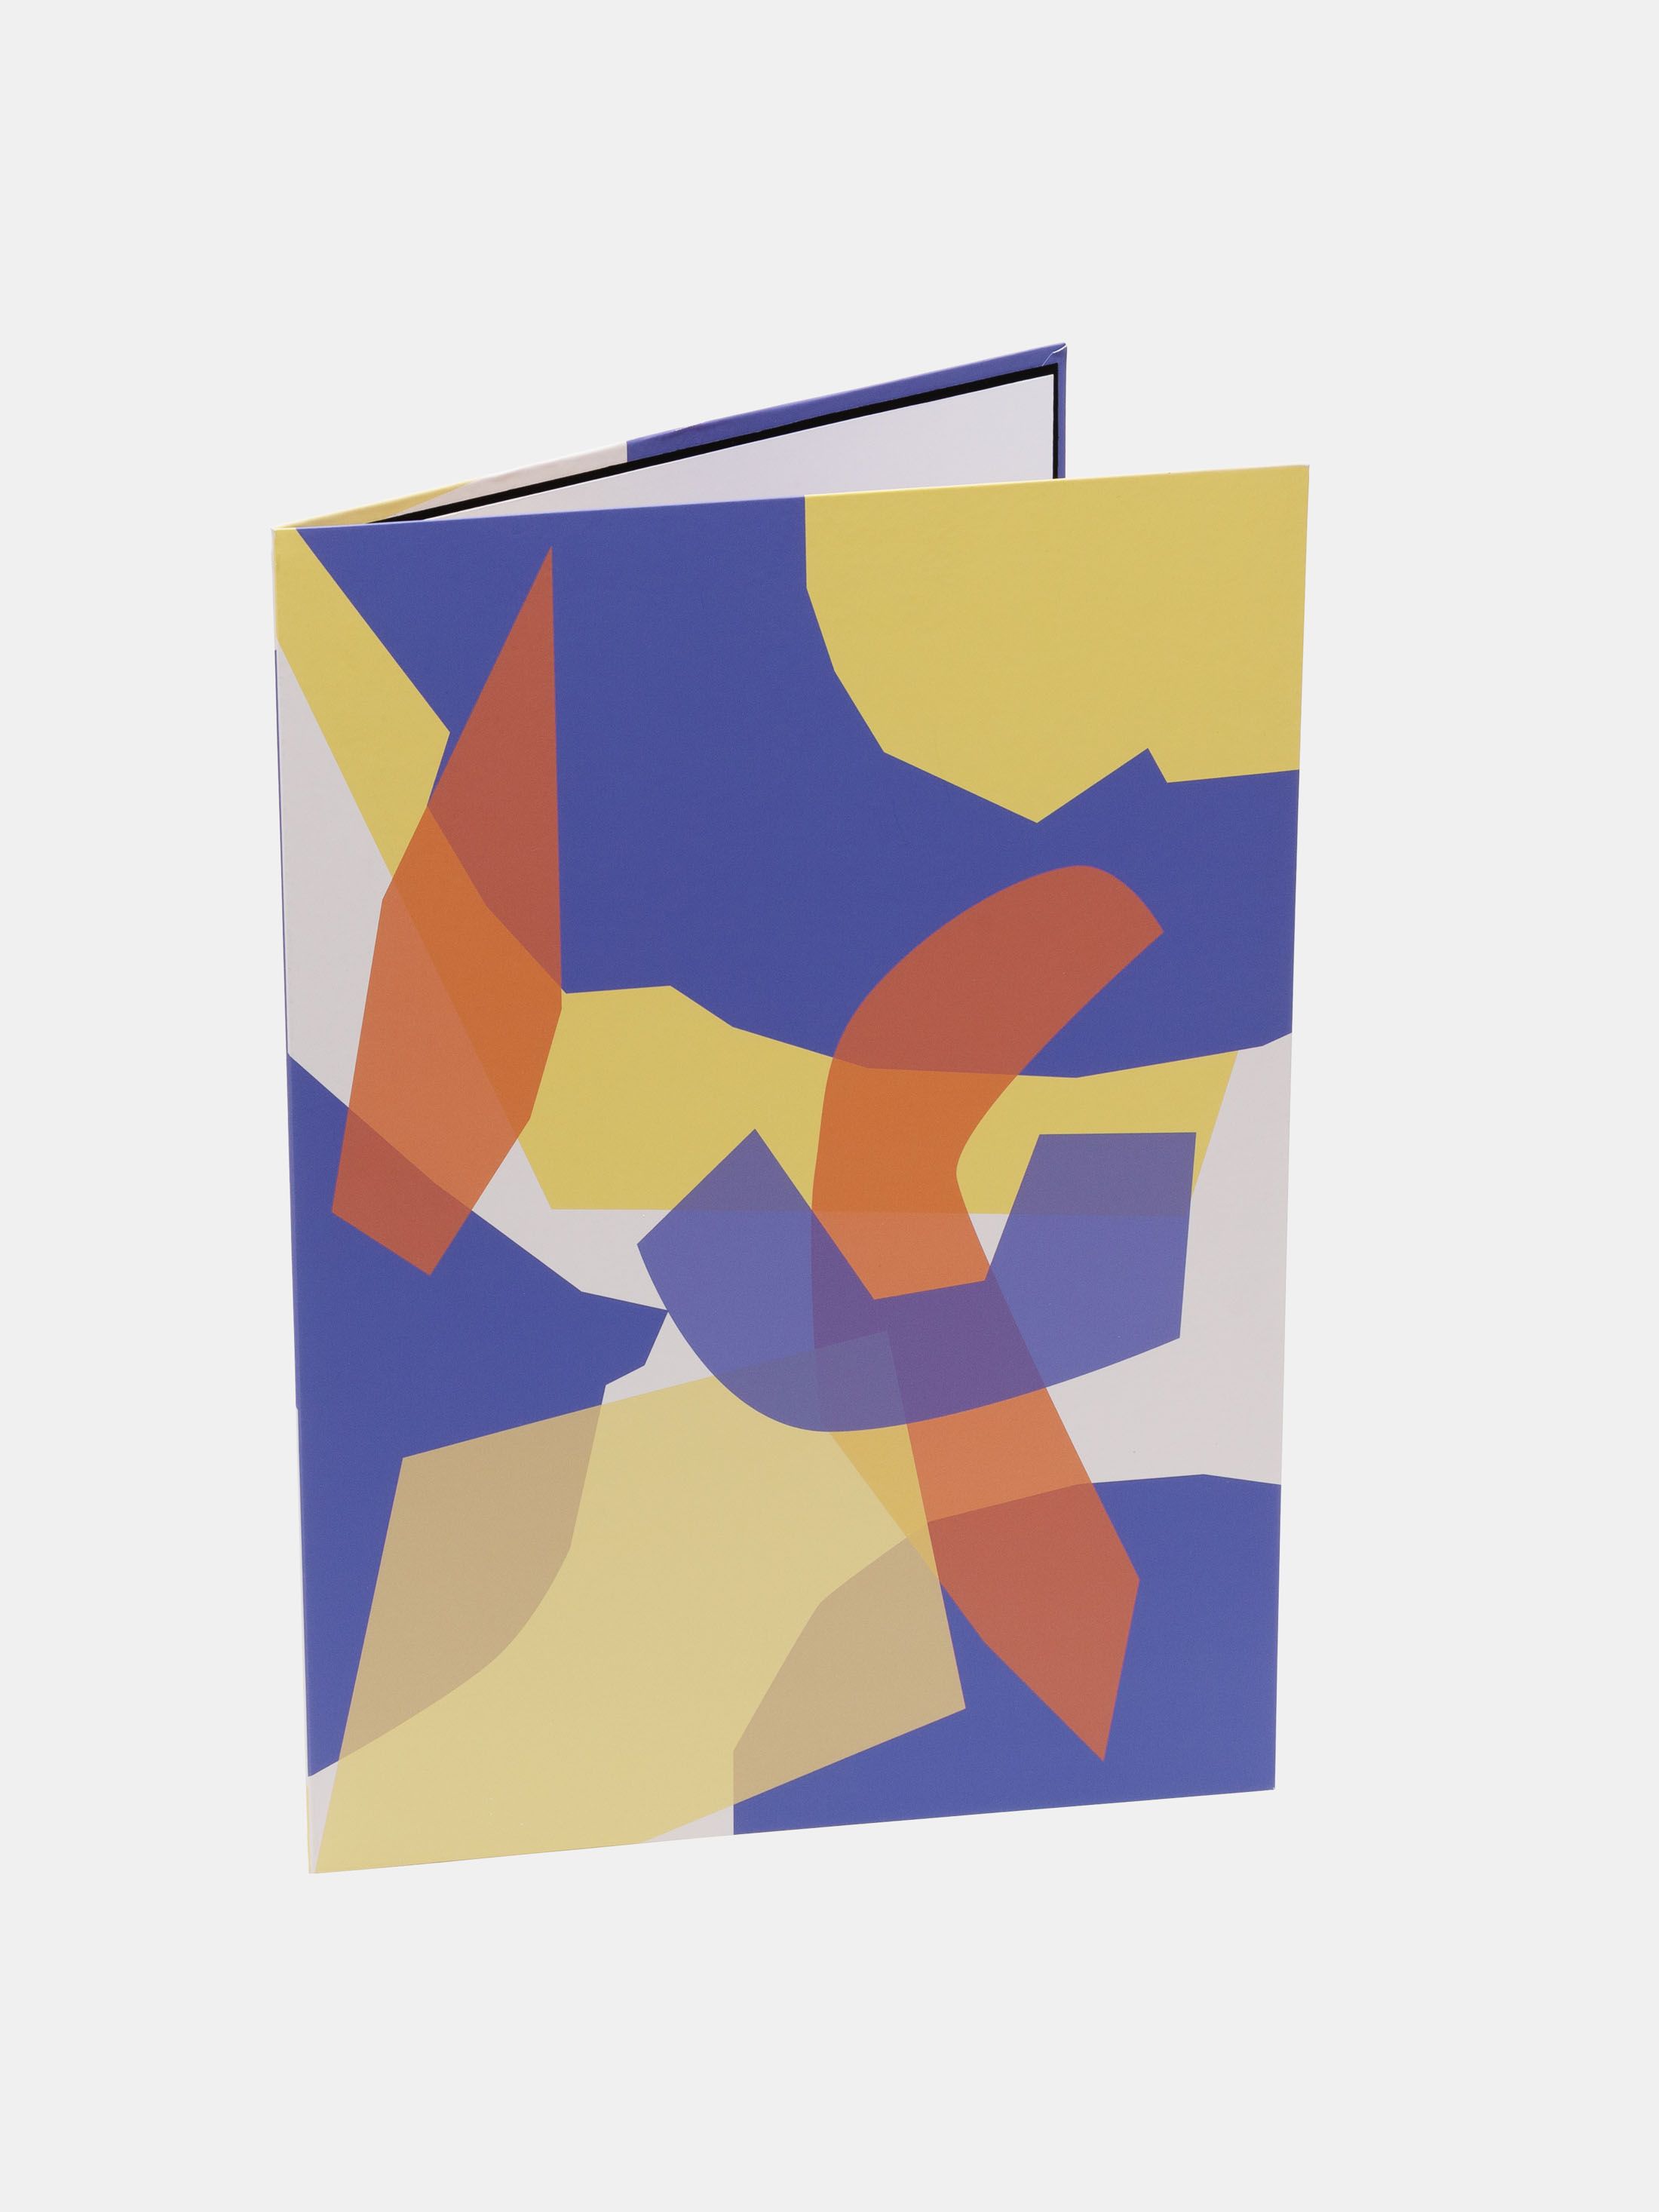 giant card printed with abstract pattern